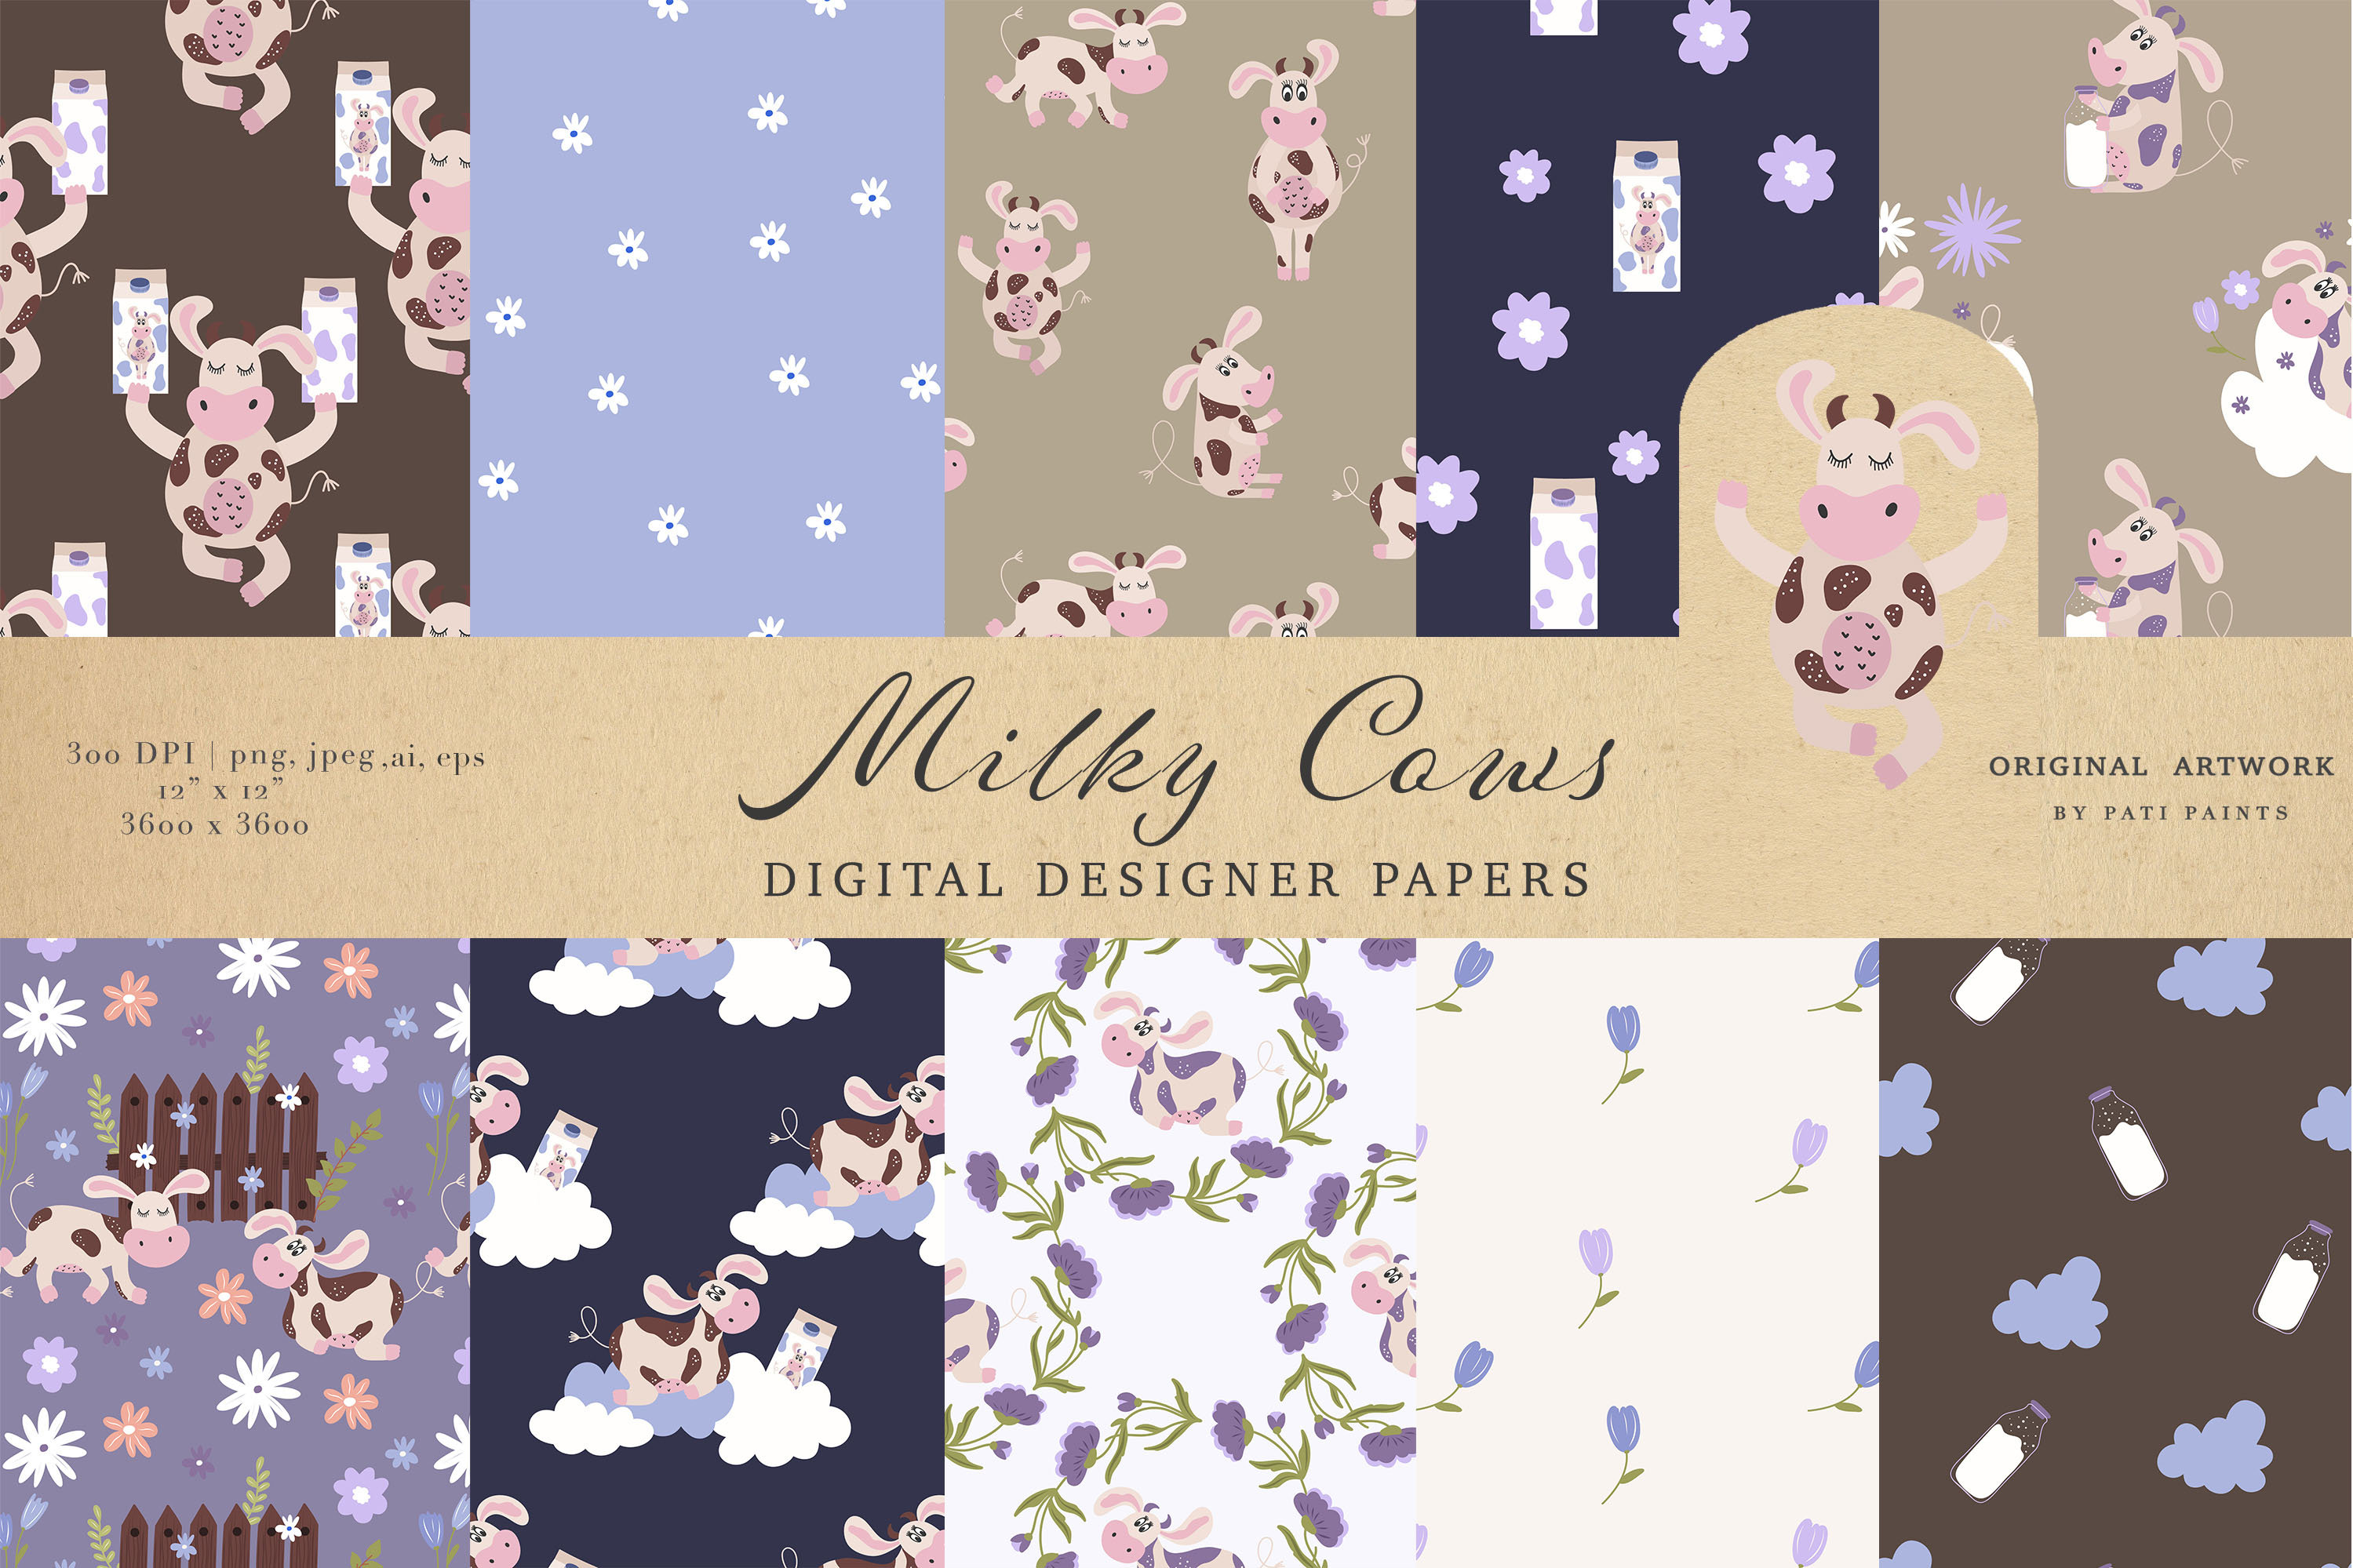 Milky Cows Cute Illustrations patterns.